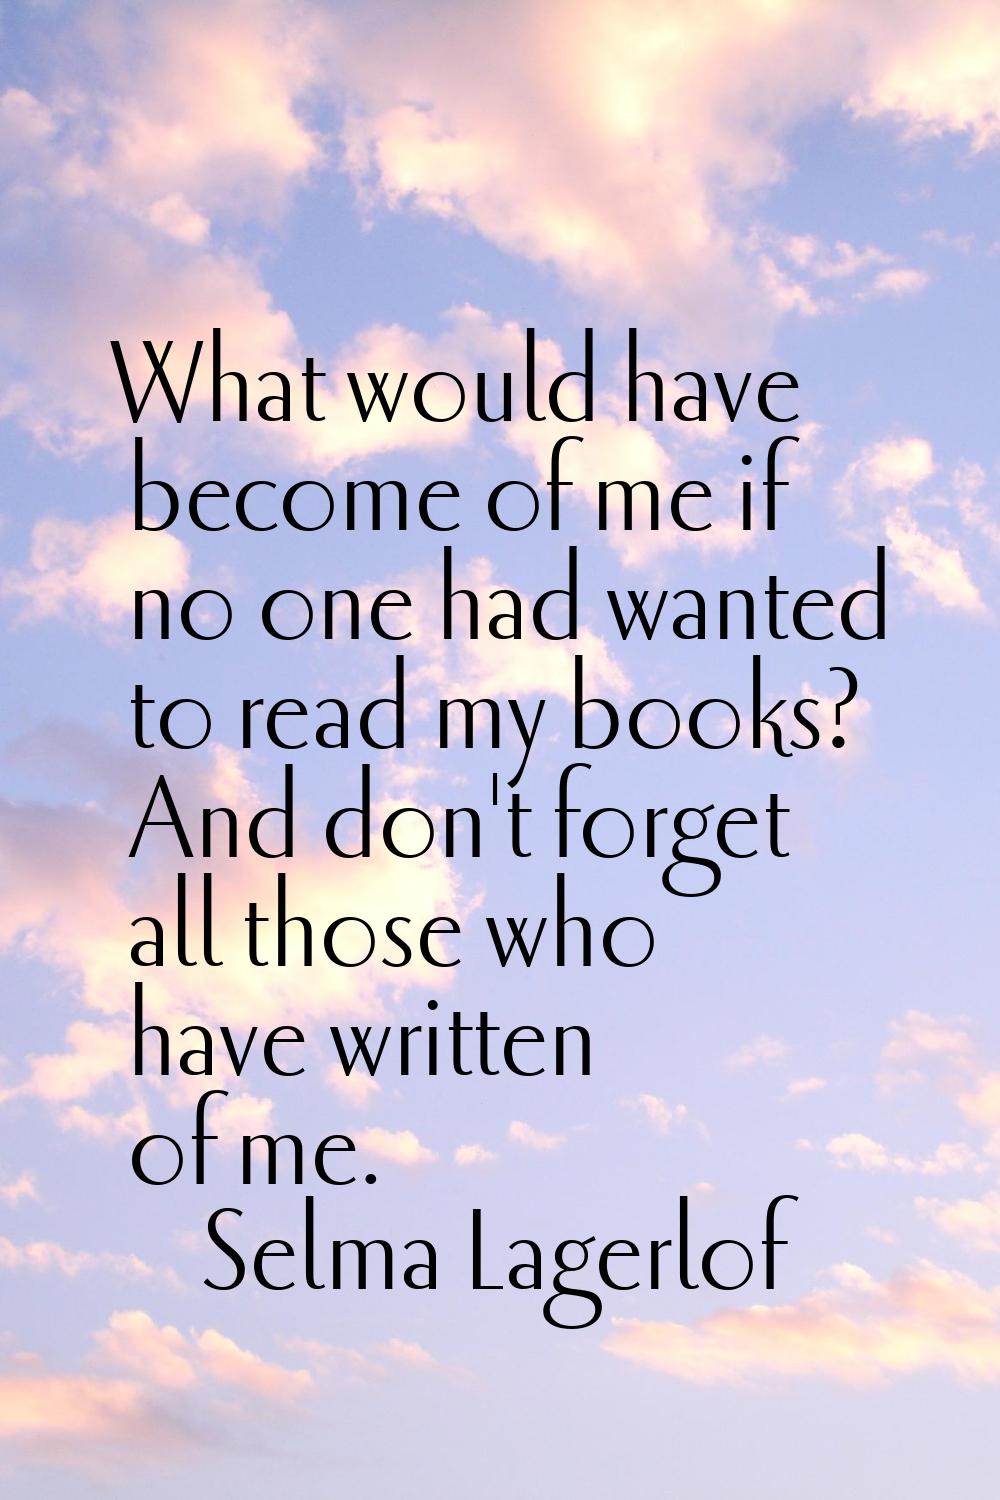 What would have become of me if no one had wanted to read my books? And don't forget all those who 